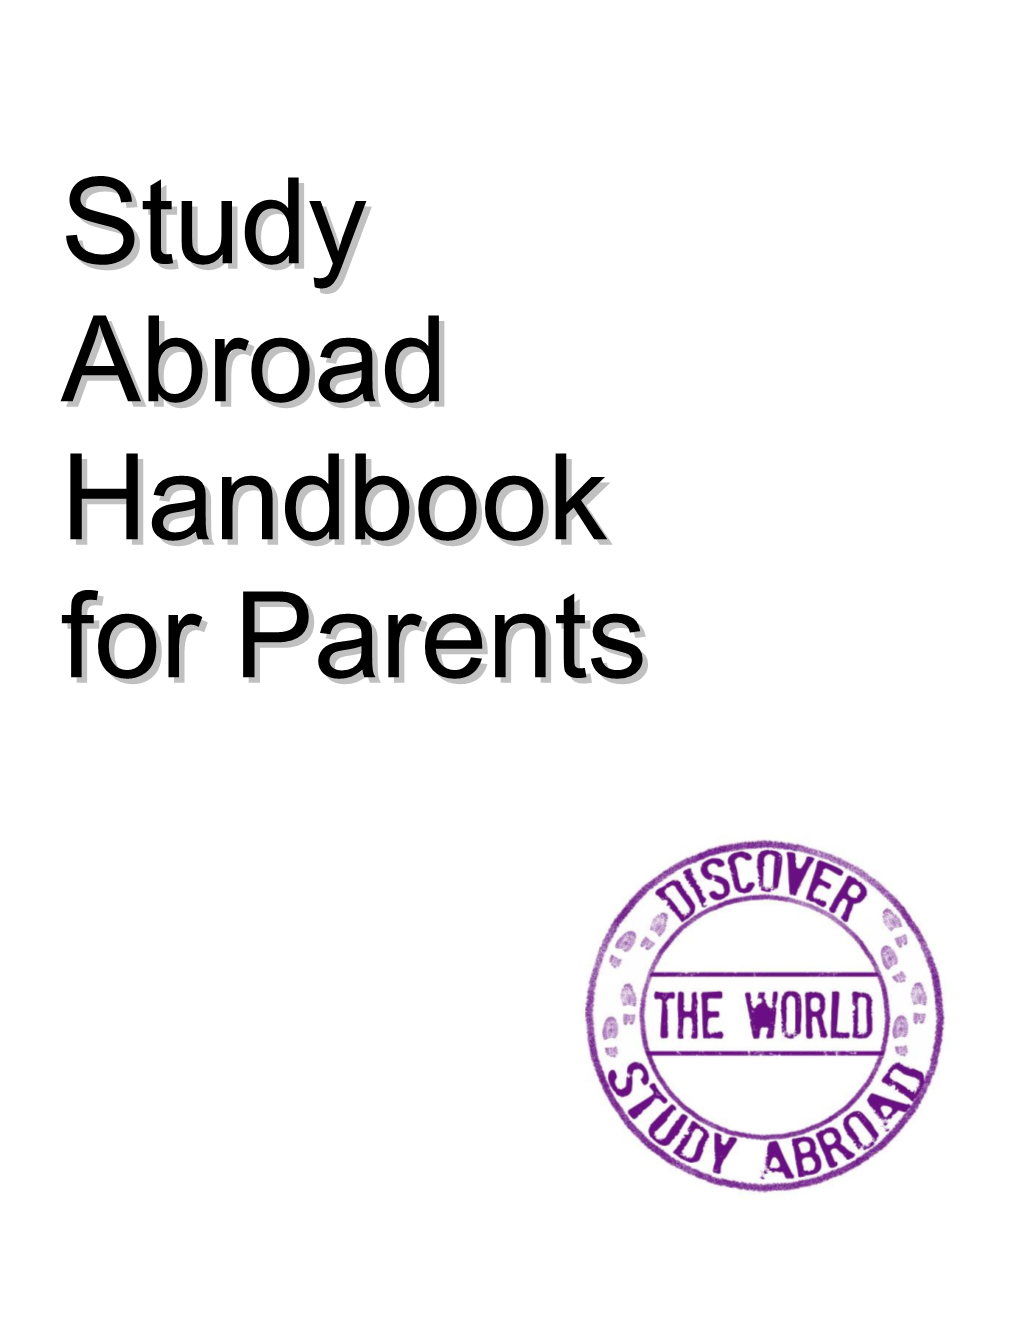 Study Abroad Handbook for Parents